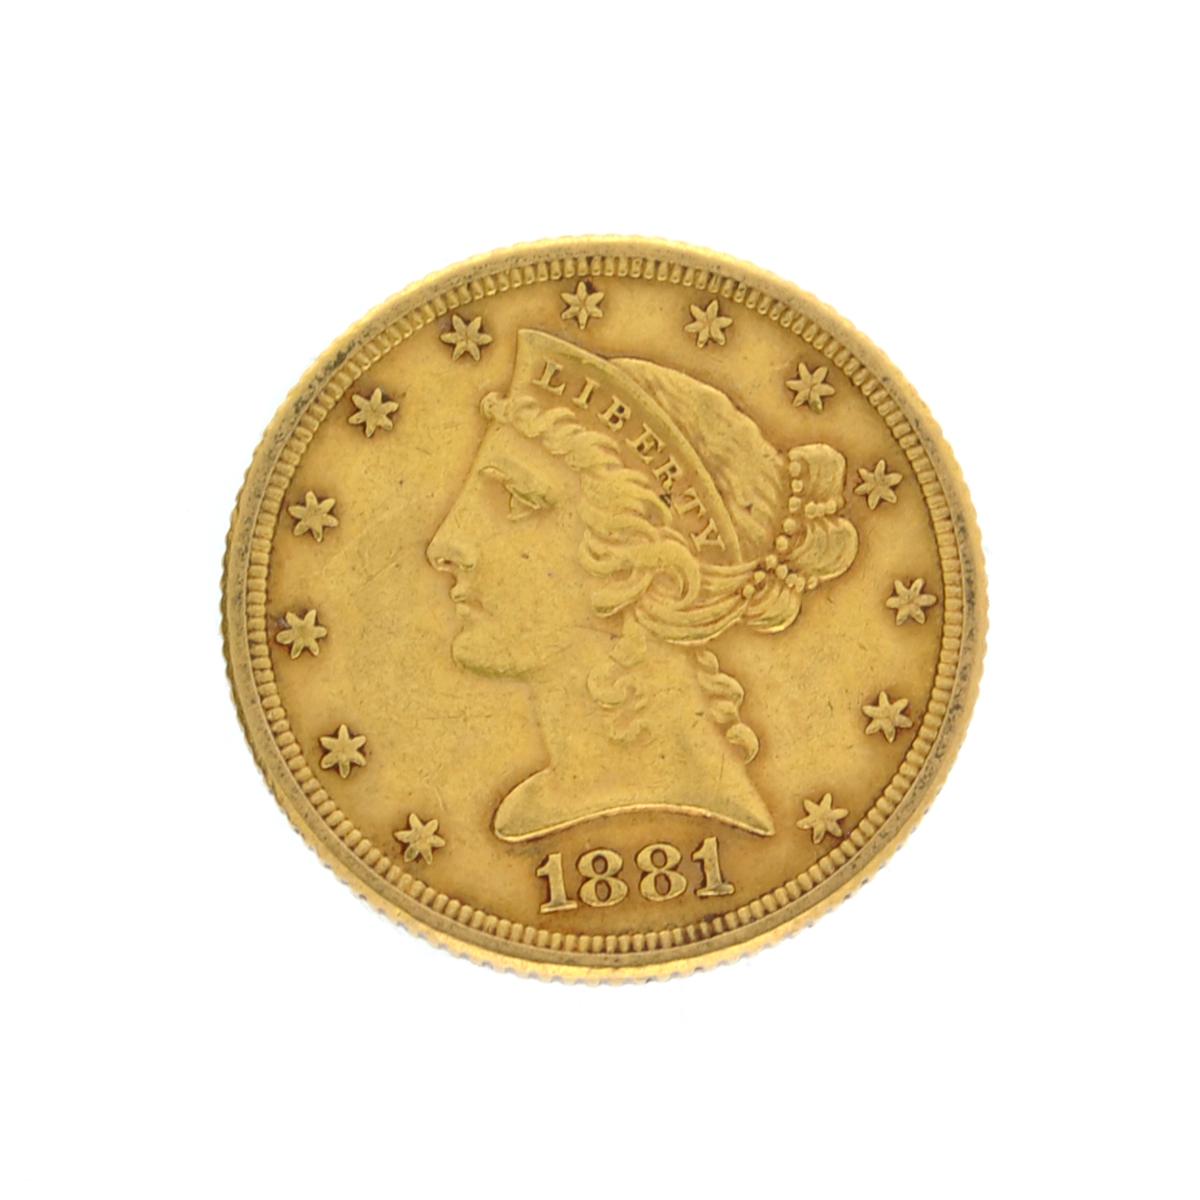 Extremely Rare 1881 $5 U.S. Liberty Head Gold Coin